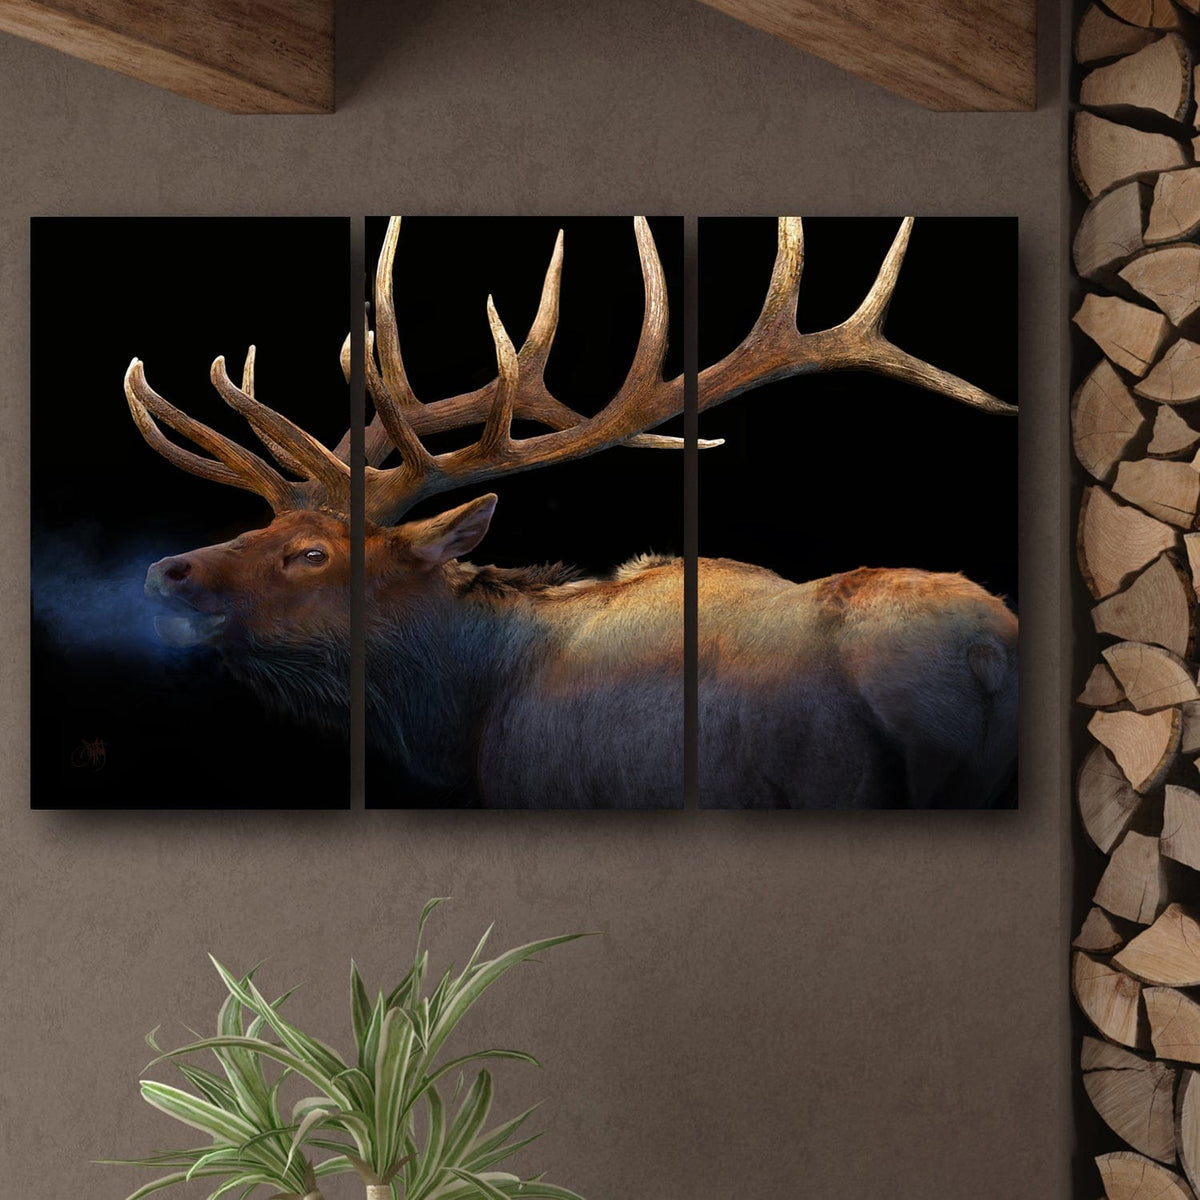 Large nature wall decor for a rustic theme - Bull Elk